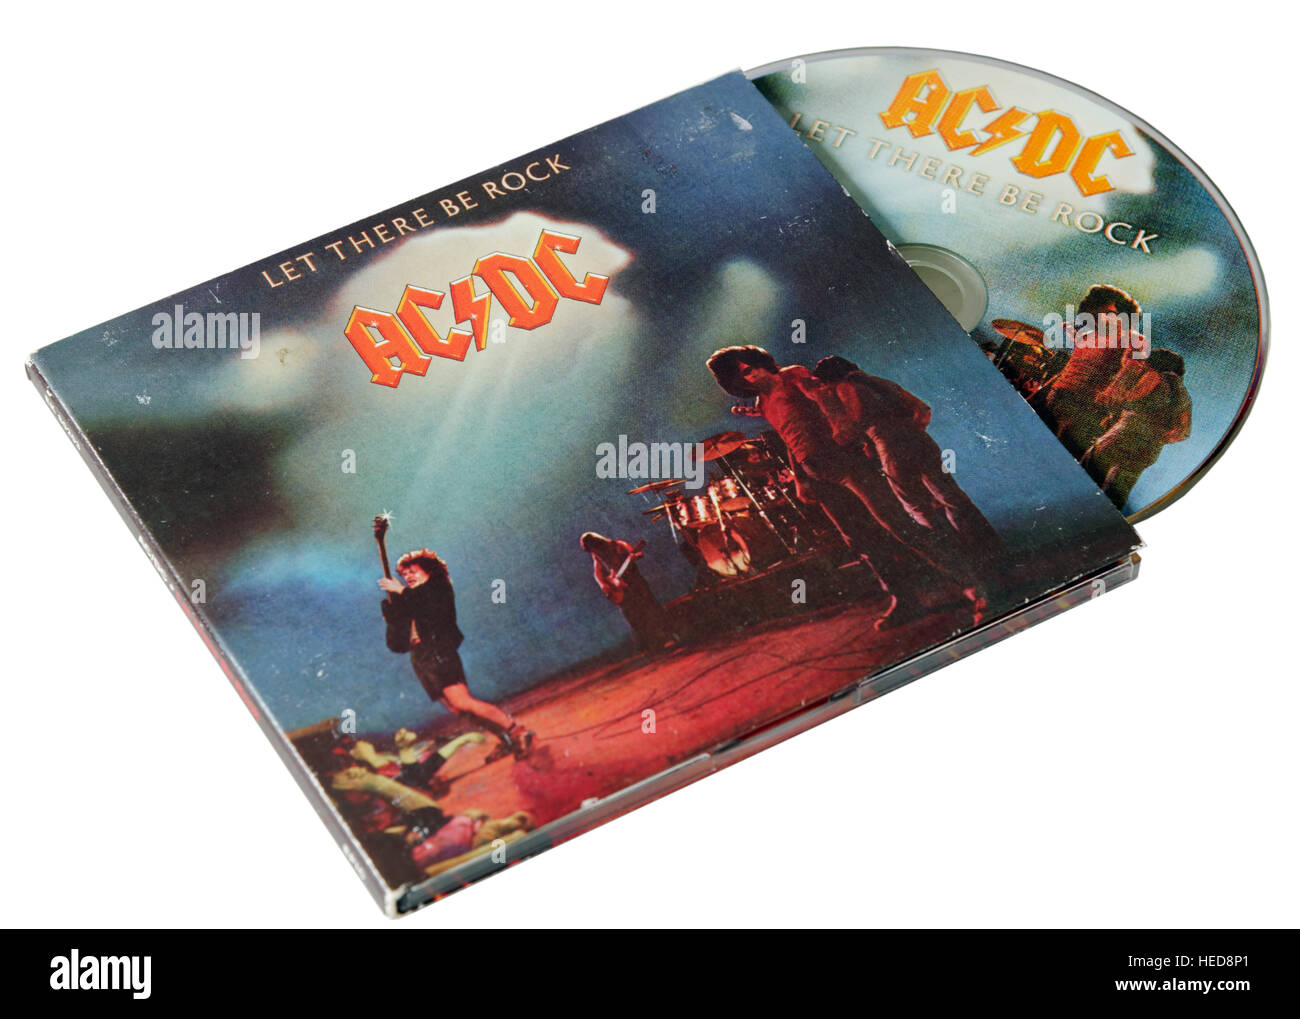 AC/DC Let There Be Rock-CD Stockfoto